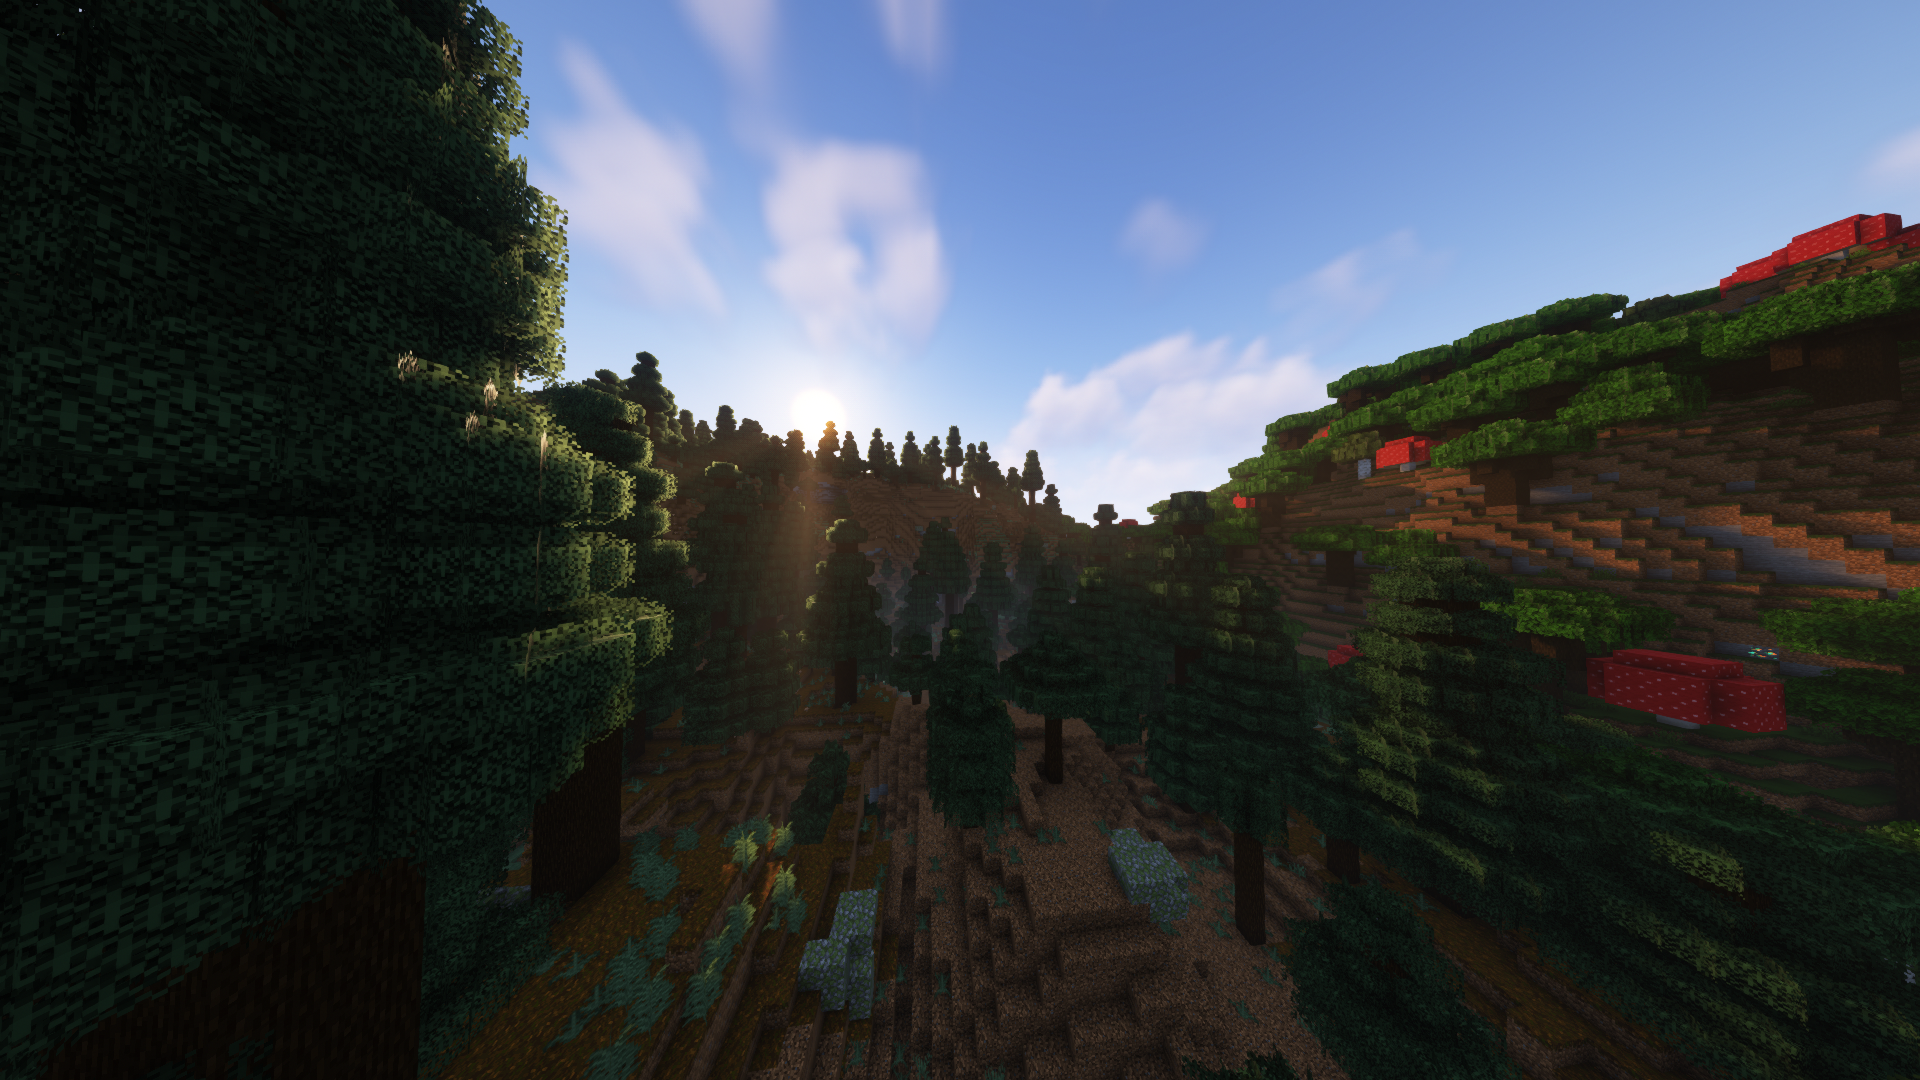 A spruce valley with bordering dark oak forest